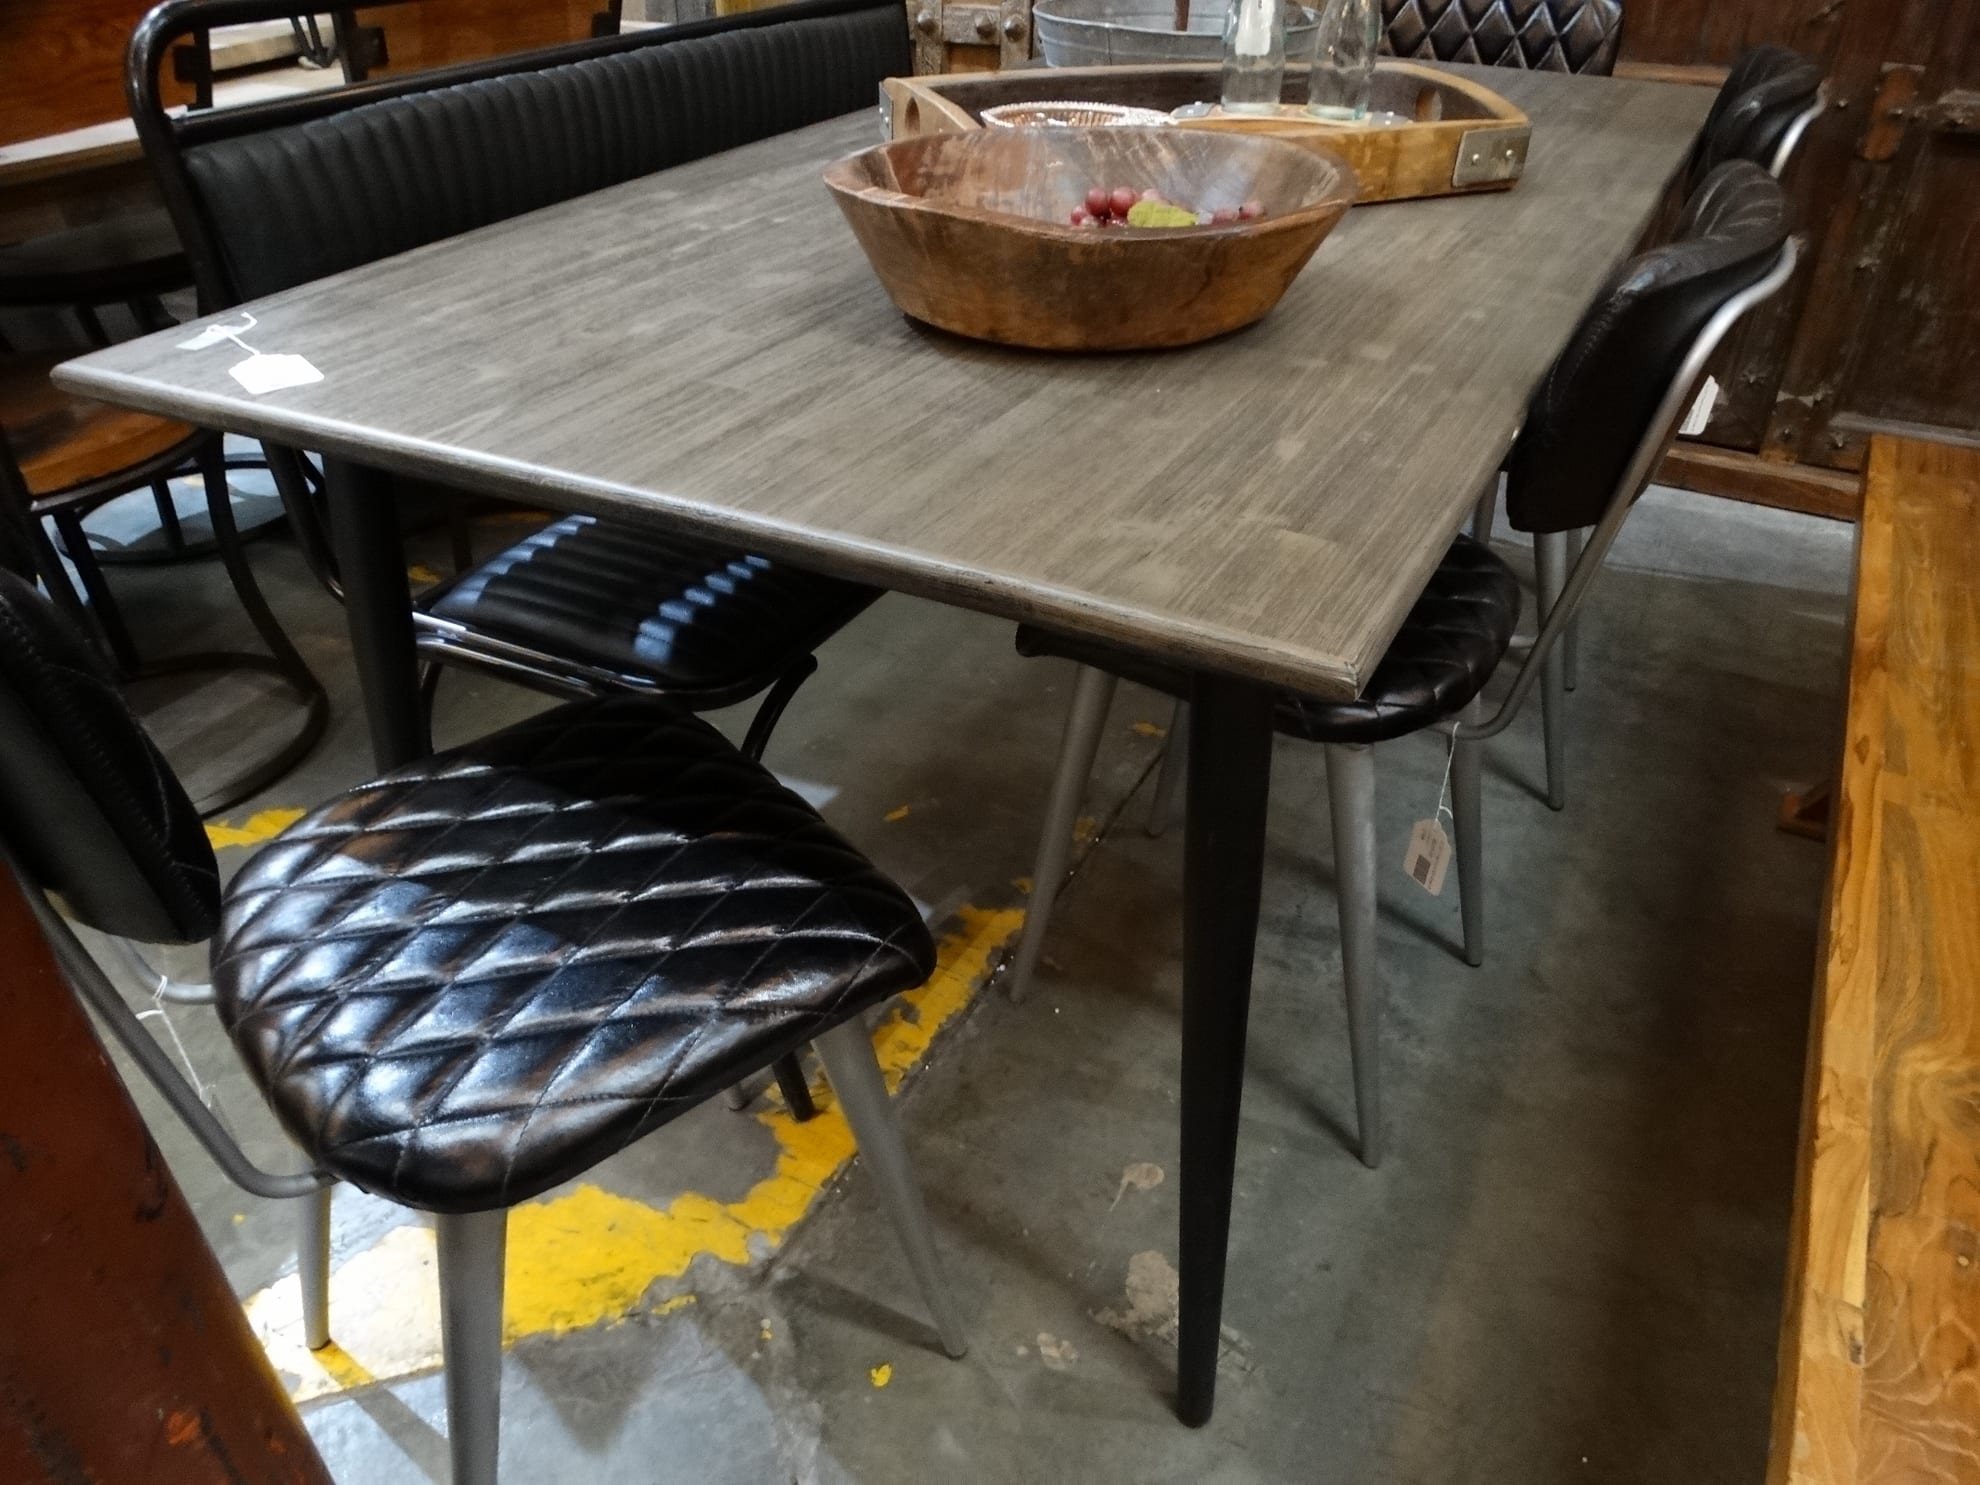 Wooden Dining Table Has A Textured Gray, Light Wooden Dining Table With Black Legs